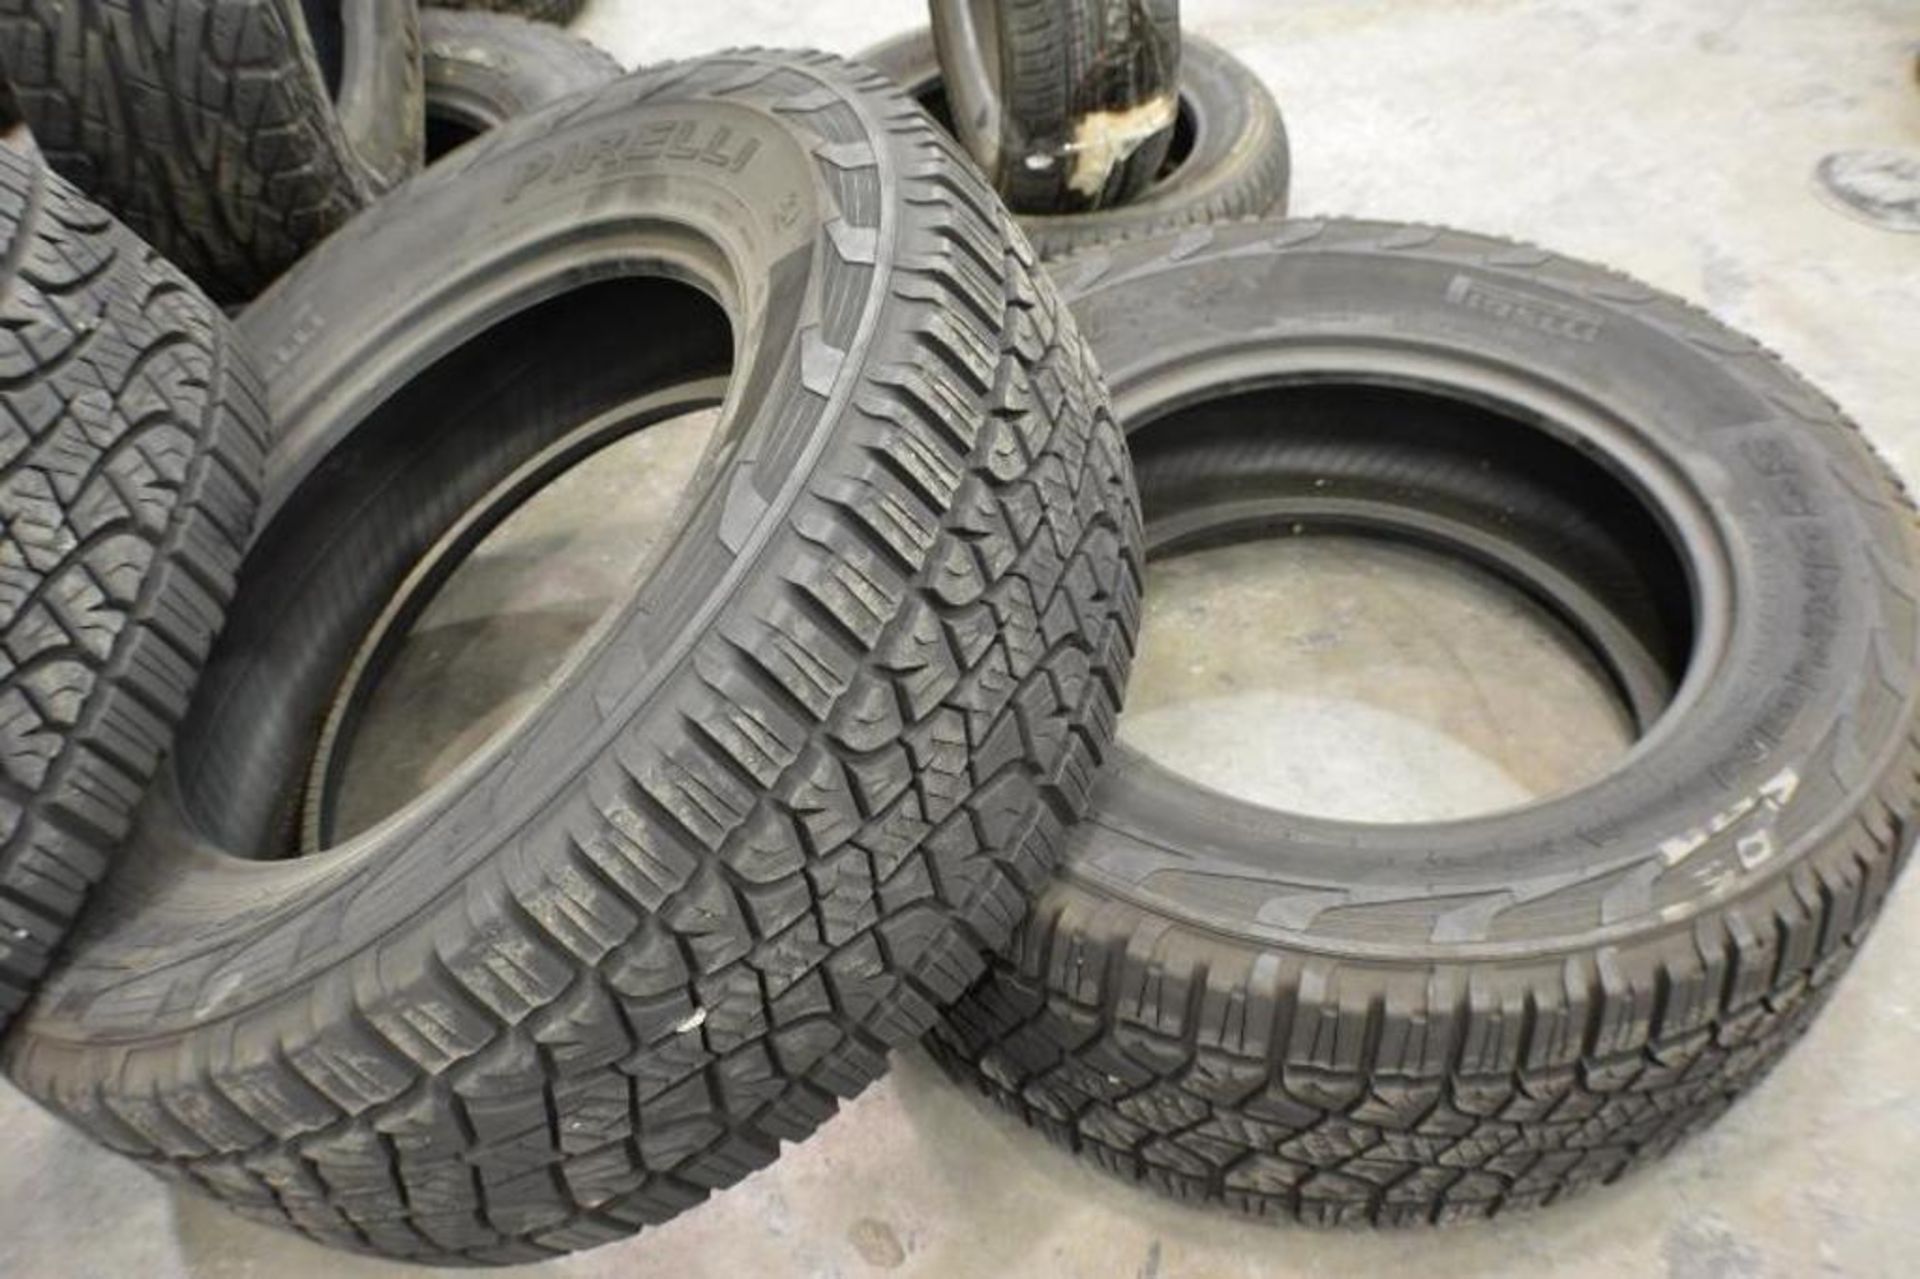 Tires. Set of 4 Tires. LT 325/60 R20 ATR by Pirelli - Image 3 of 8